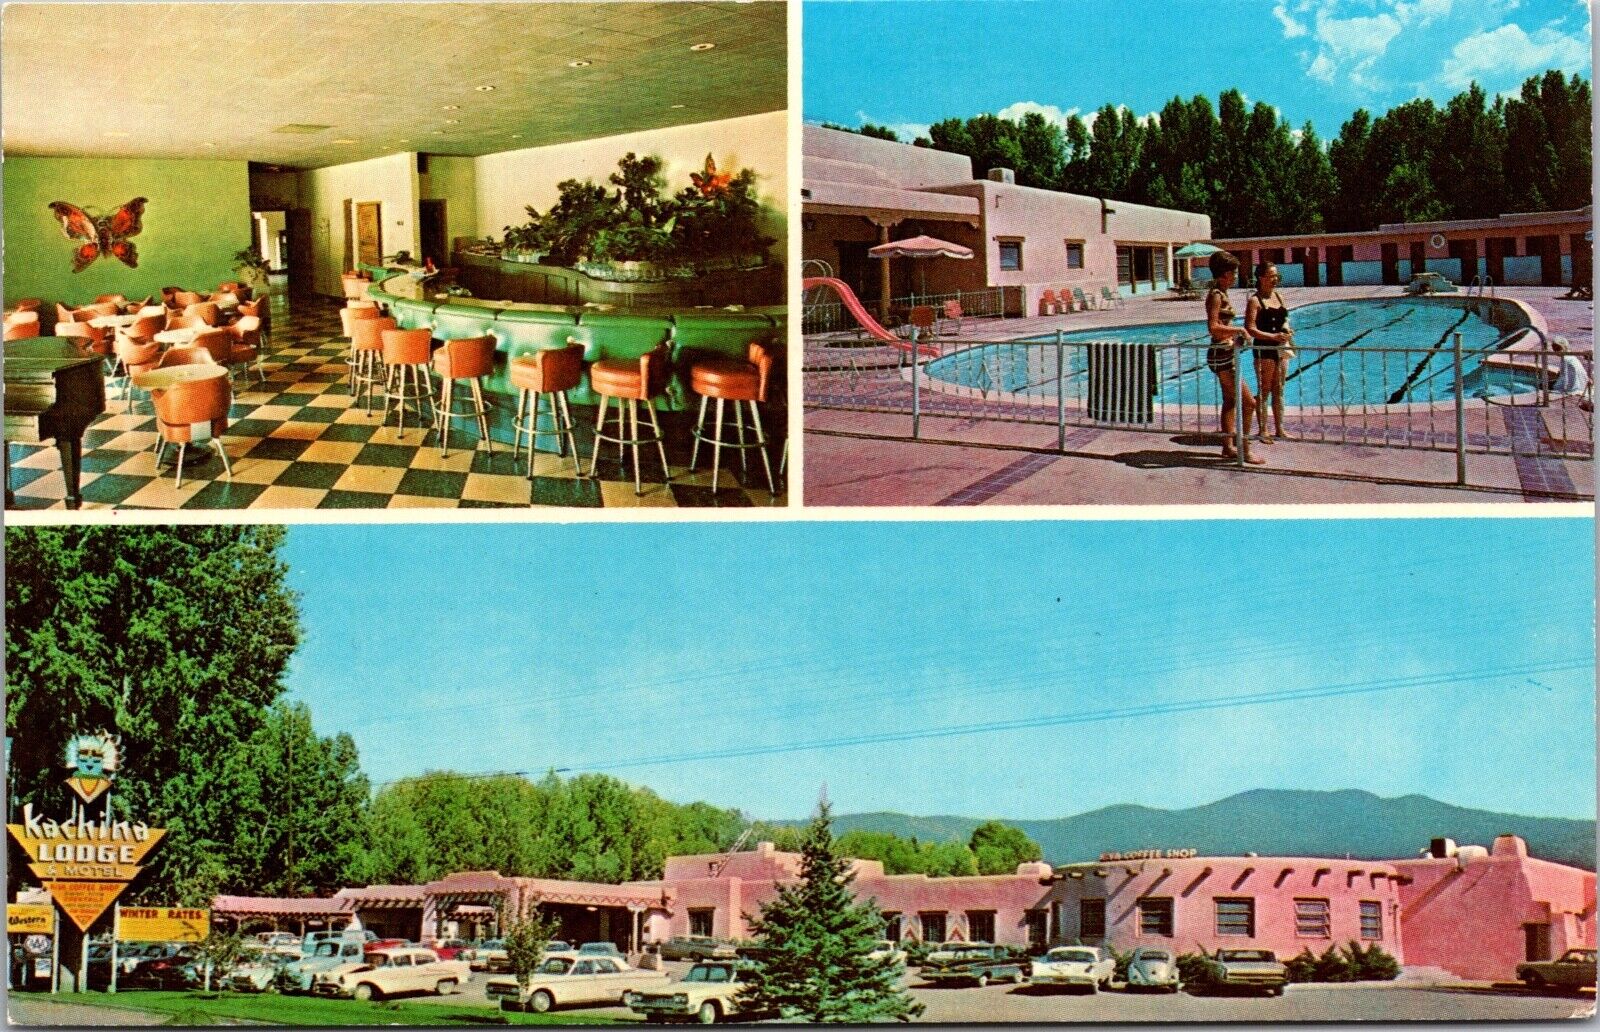 Postcard Kachina Lodge and Motel in Taos, New Mexico~950